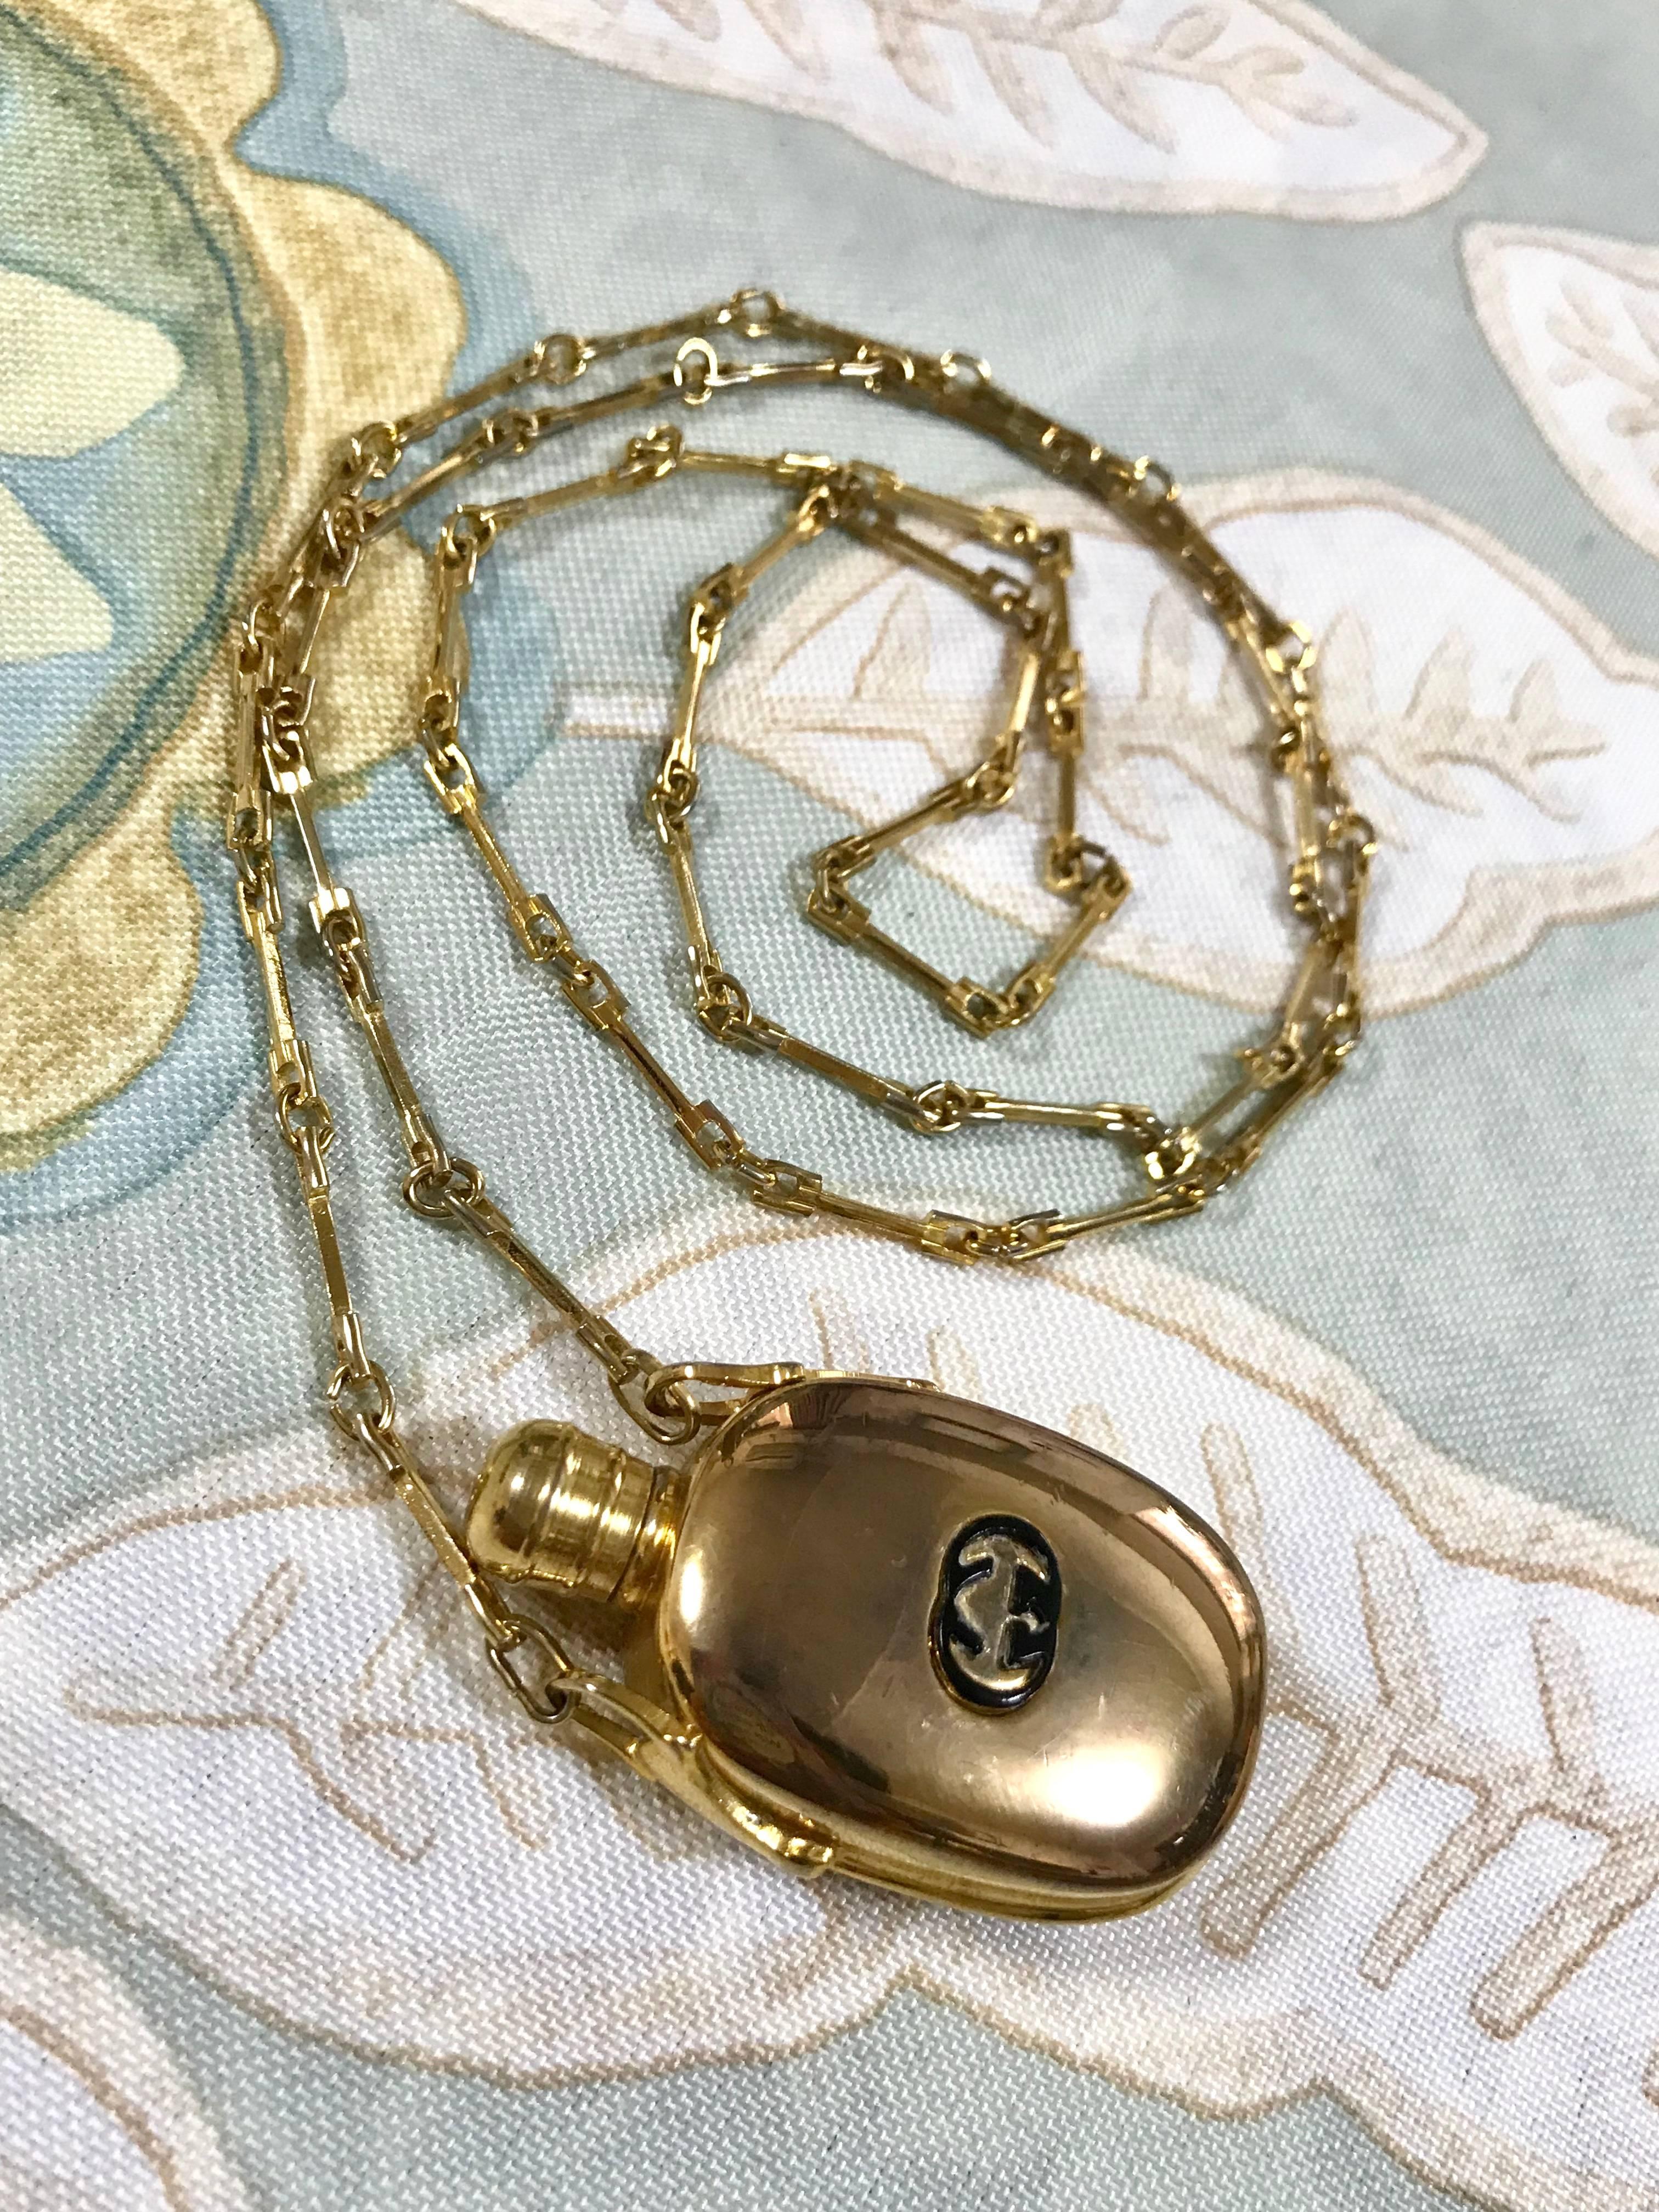 Women's or Men's Vintage Gucci golden perfume bottle necklace with logo mark on top. 